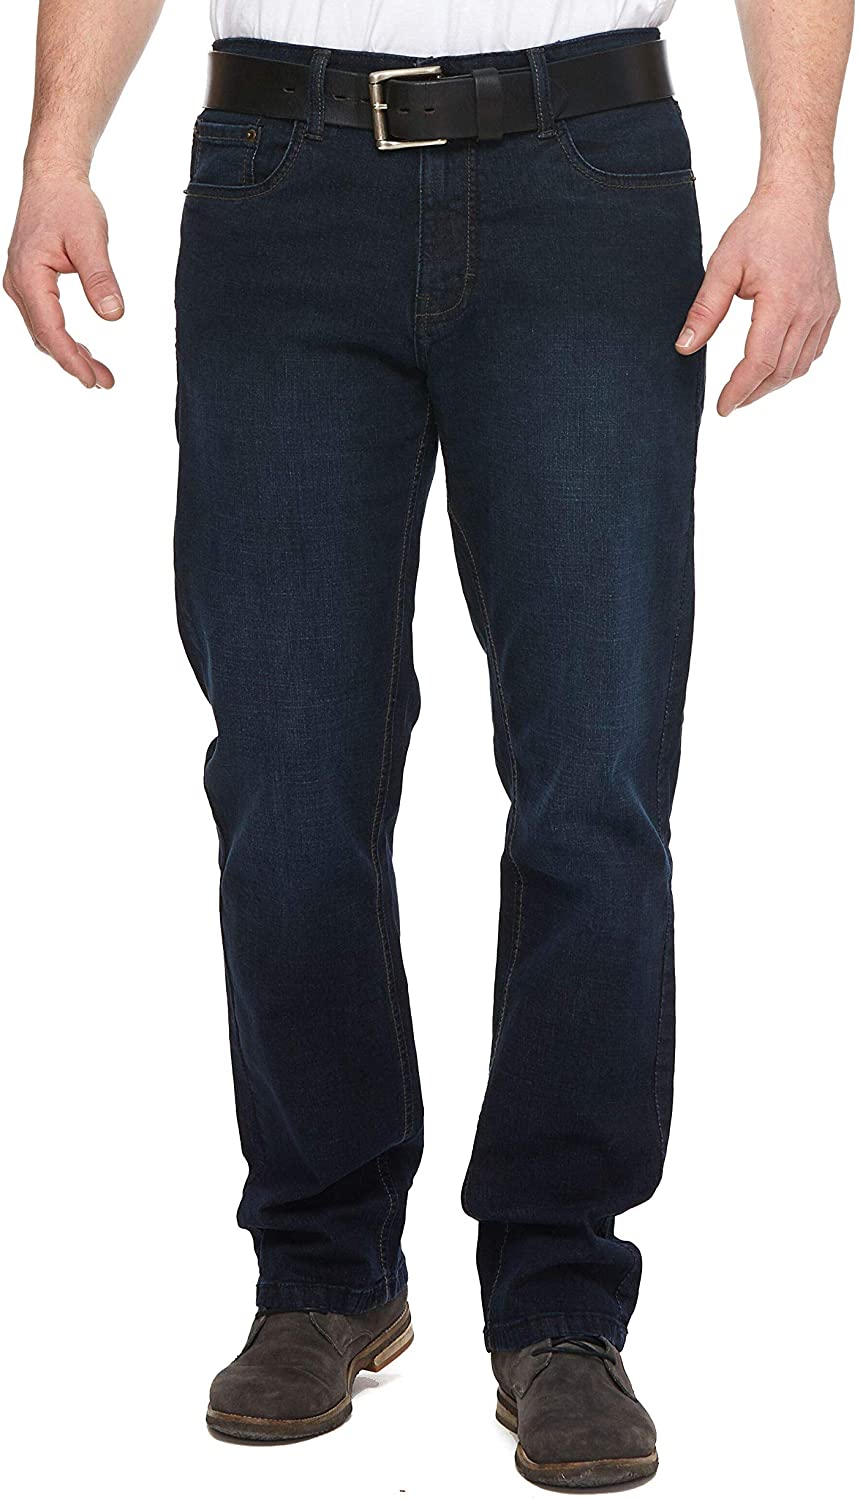 Urban Star Mens Jeans Relaxed Fit – Straight Leg Stretch Jeans for